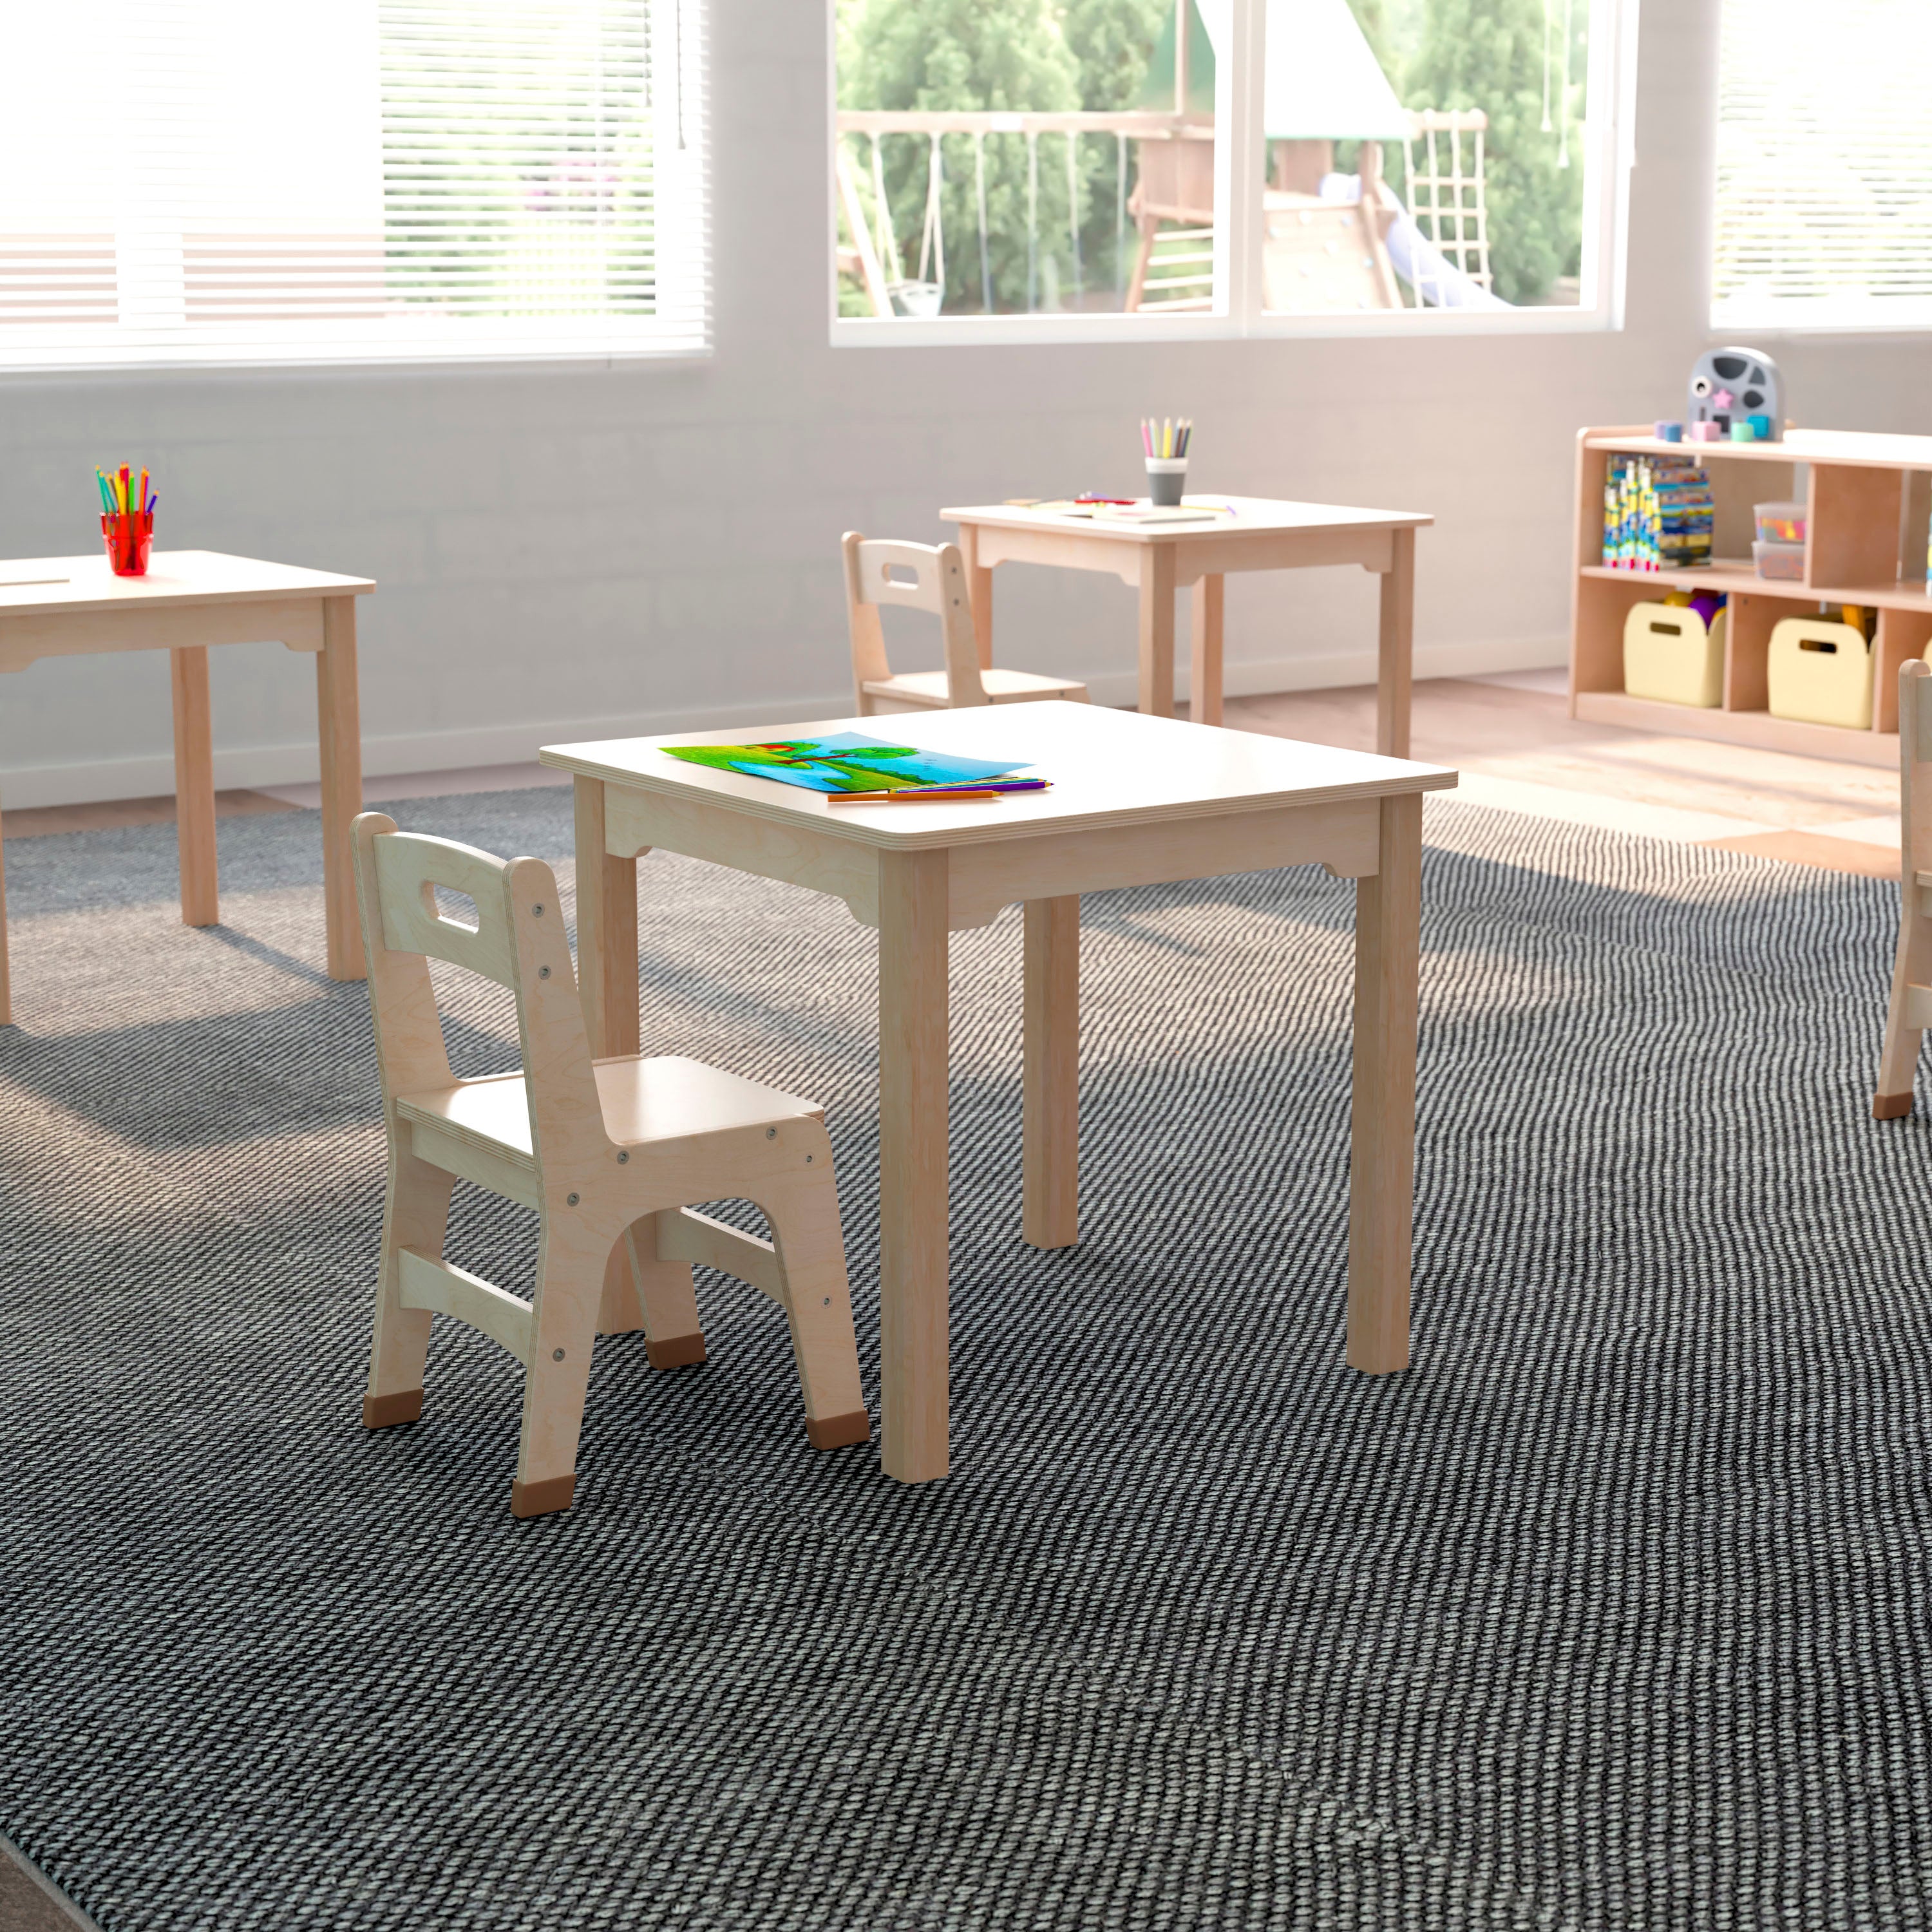 Bright Beginnings Commercial Grade Wooden Square Preschool Classroom Activity Table-Square Activity Table-Flash Furniture-Wall2Wall Furnishings